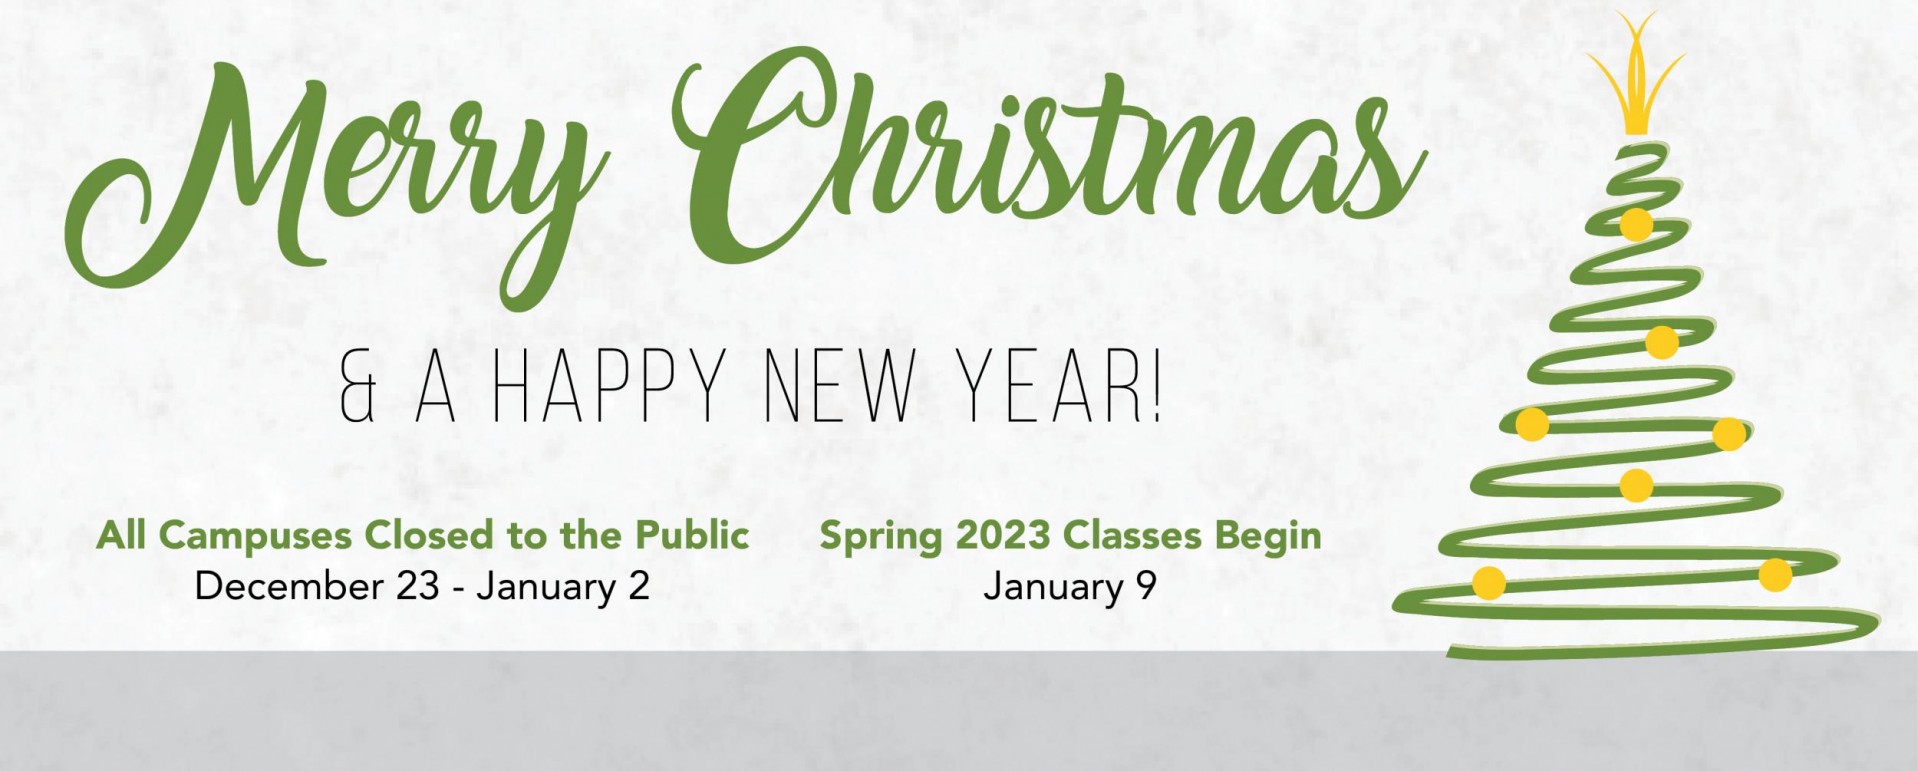 All campuses will be closed to the public December 23 - January 2.